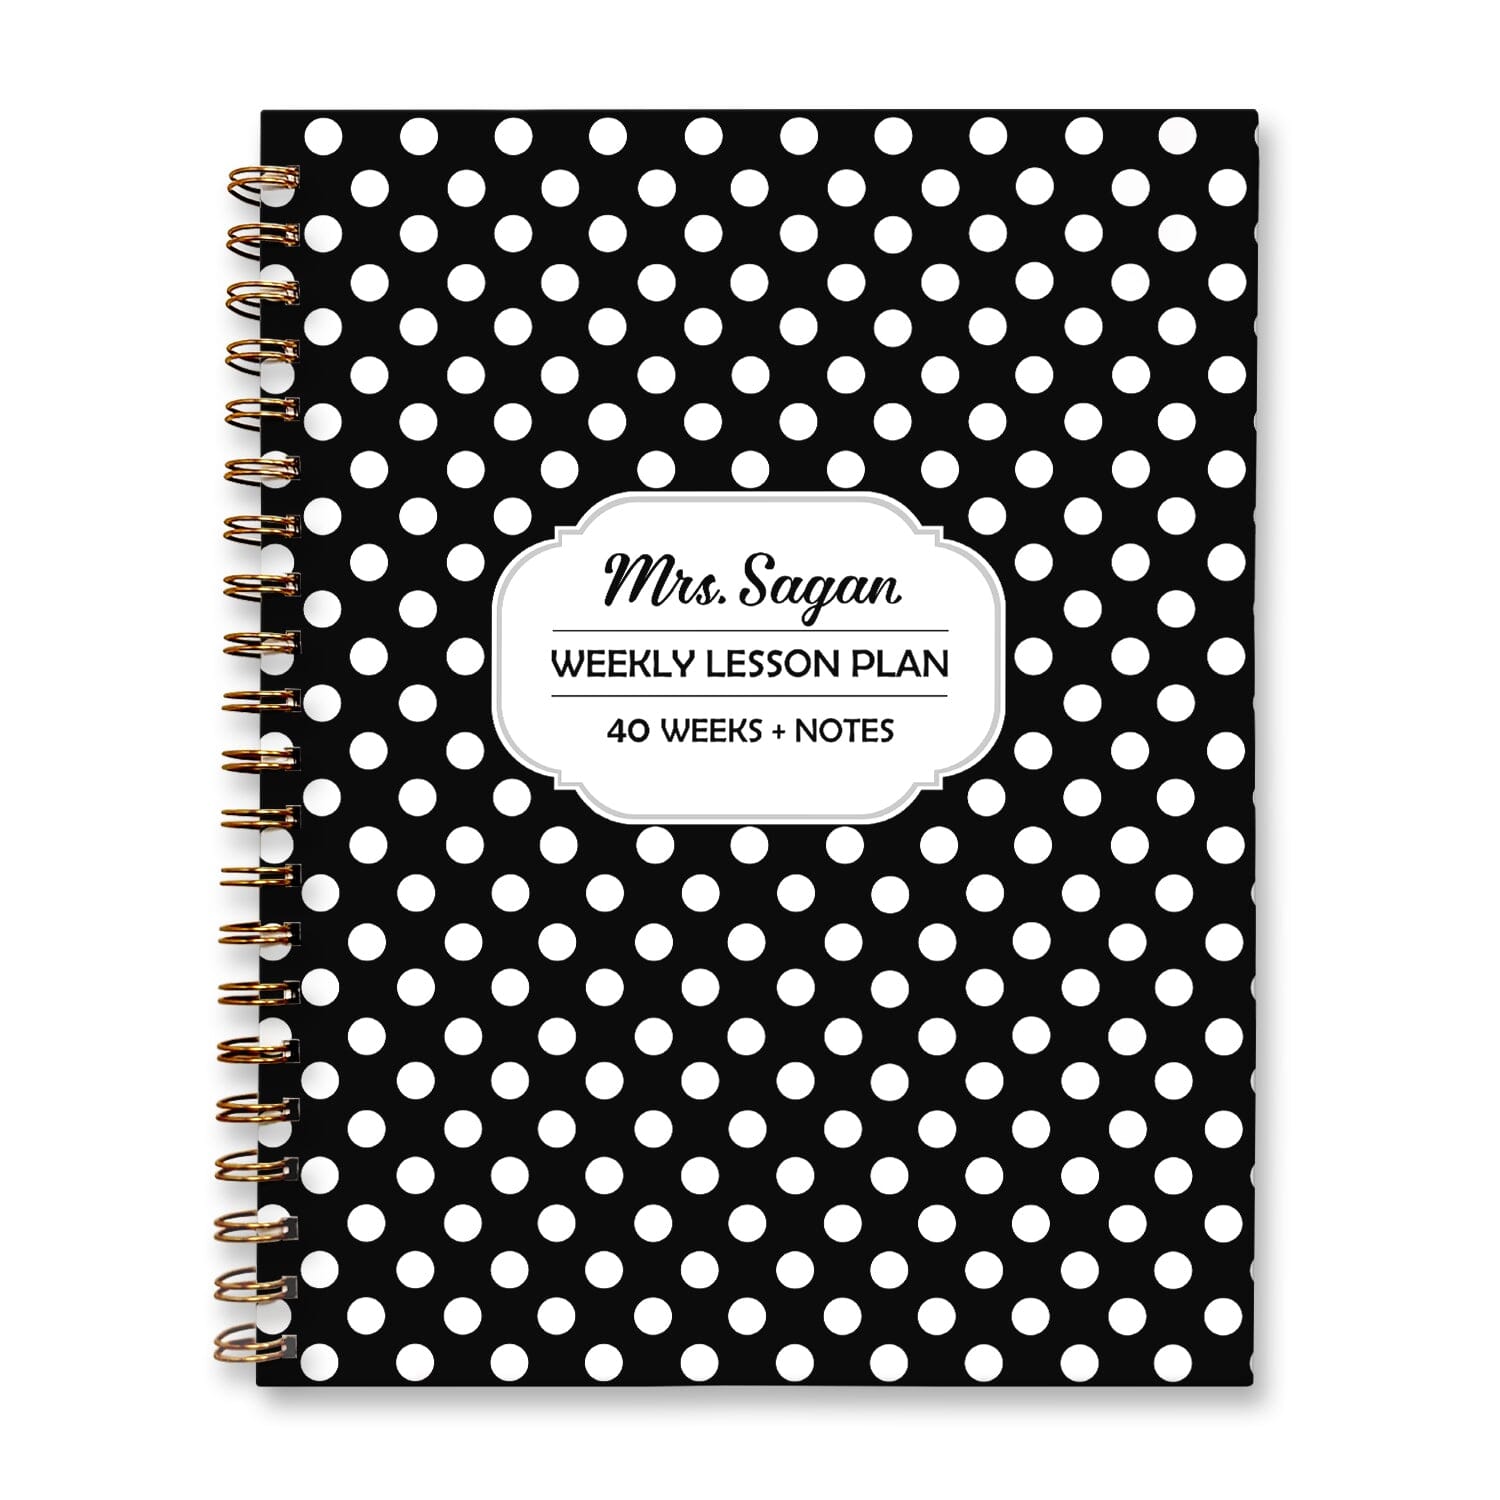 Personalized Black Polka Dot Weekly Lesson Plan Book at Artistically Invited. Hardcover planner book for teachers or homeschooling.